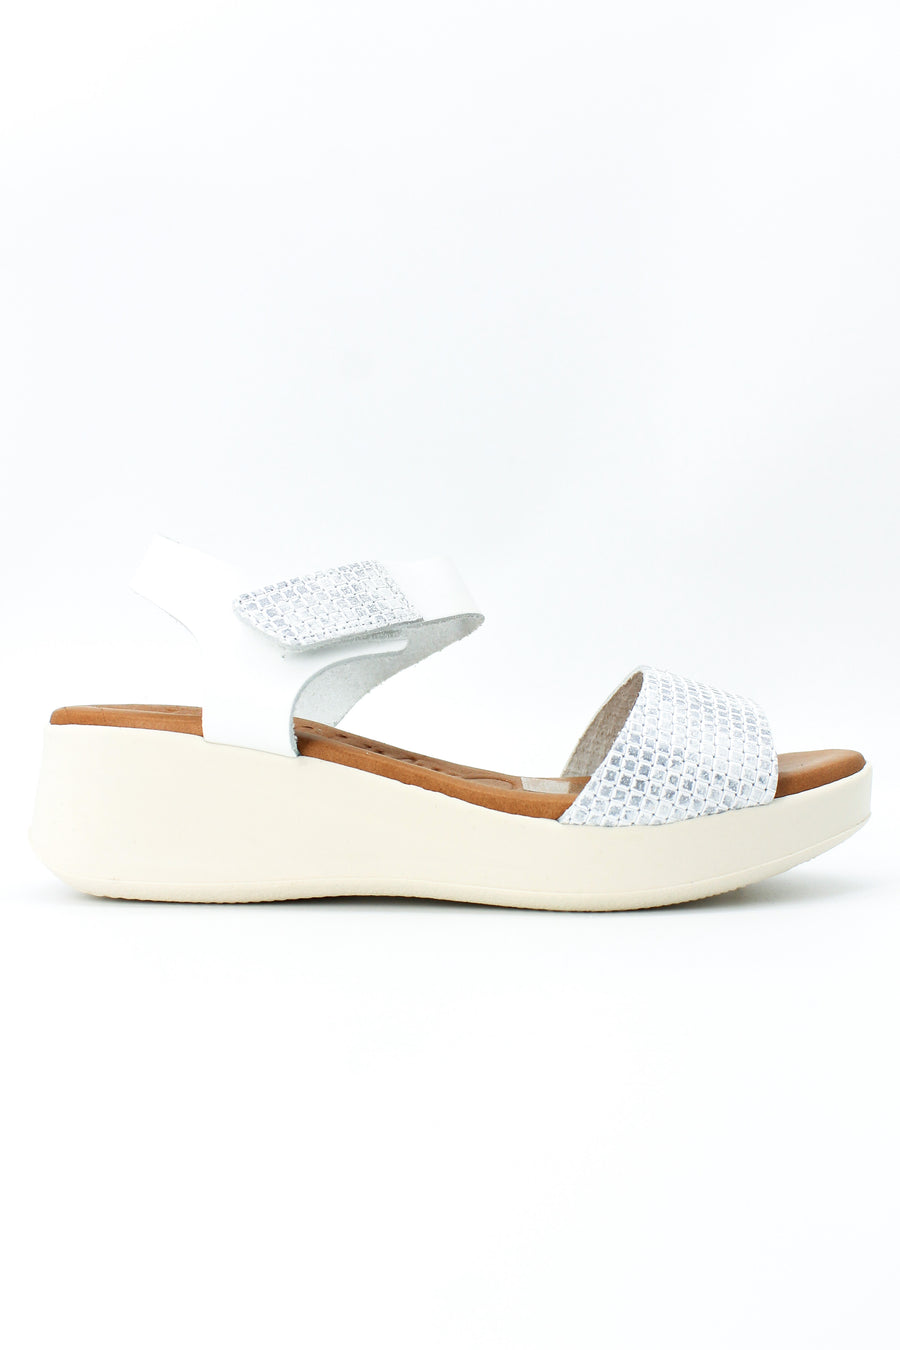 Oh My Sandals 5187 White